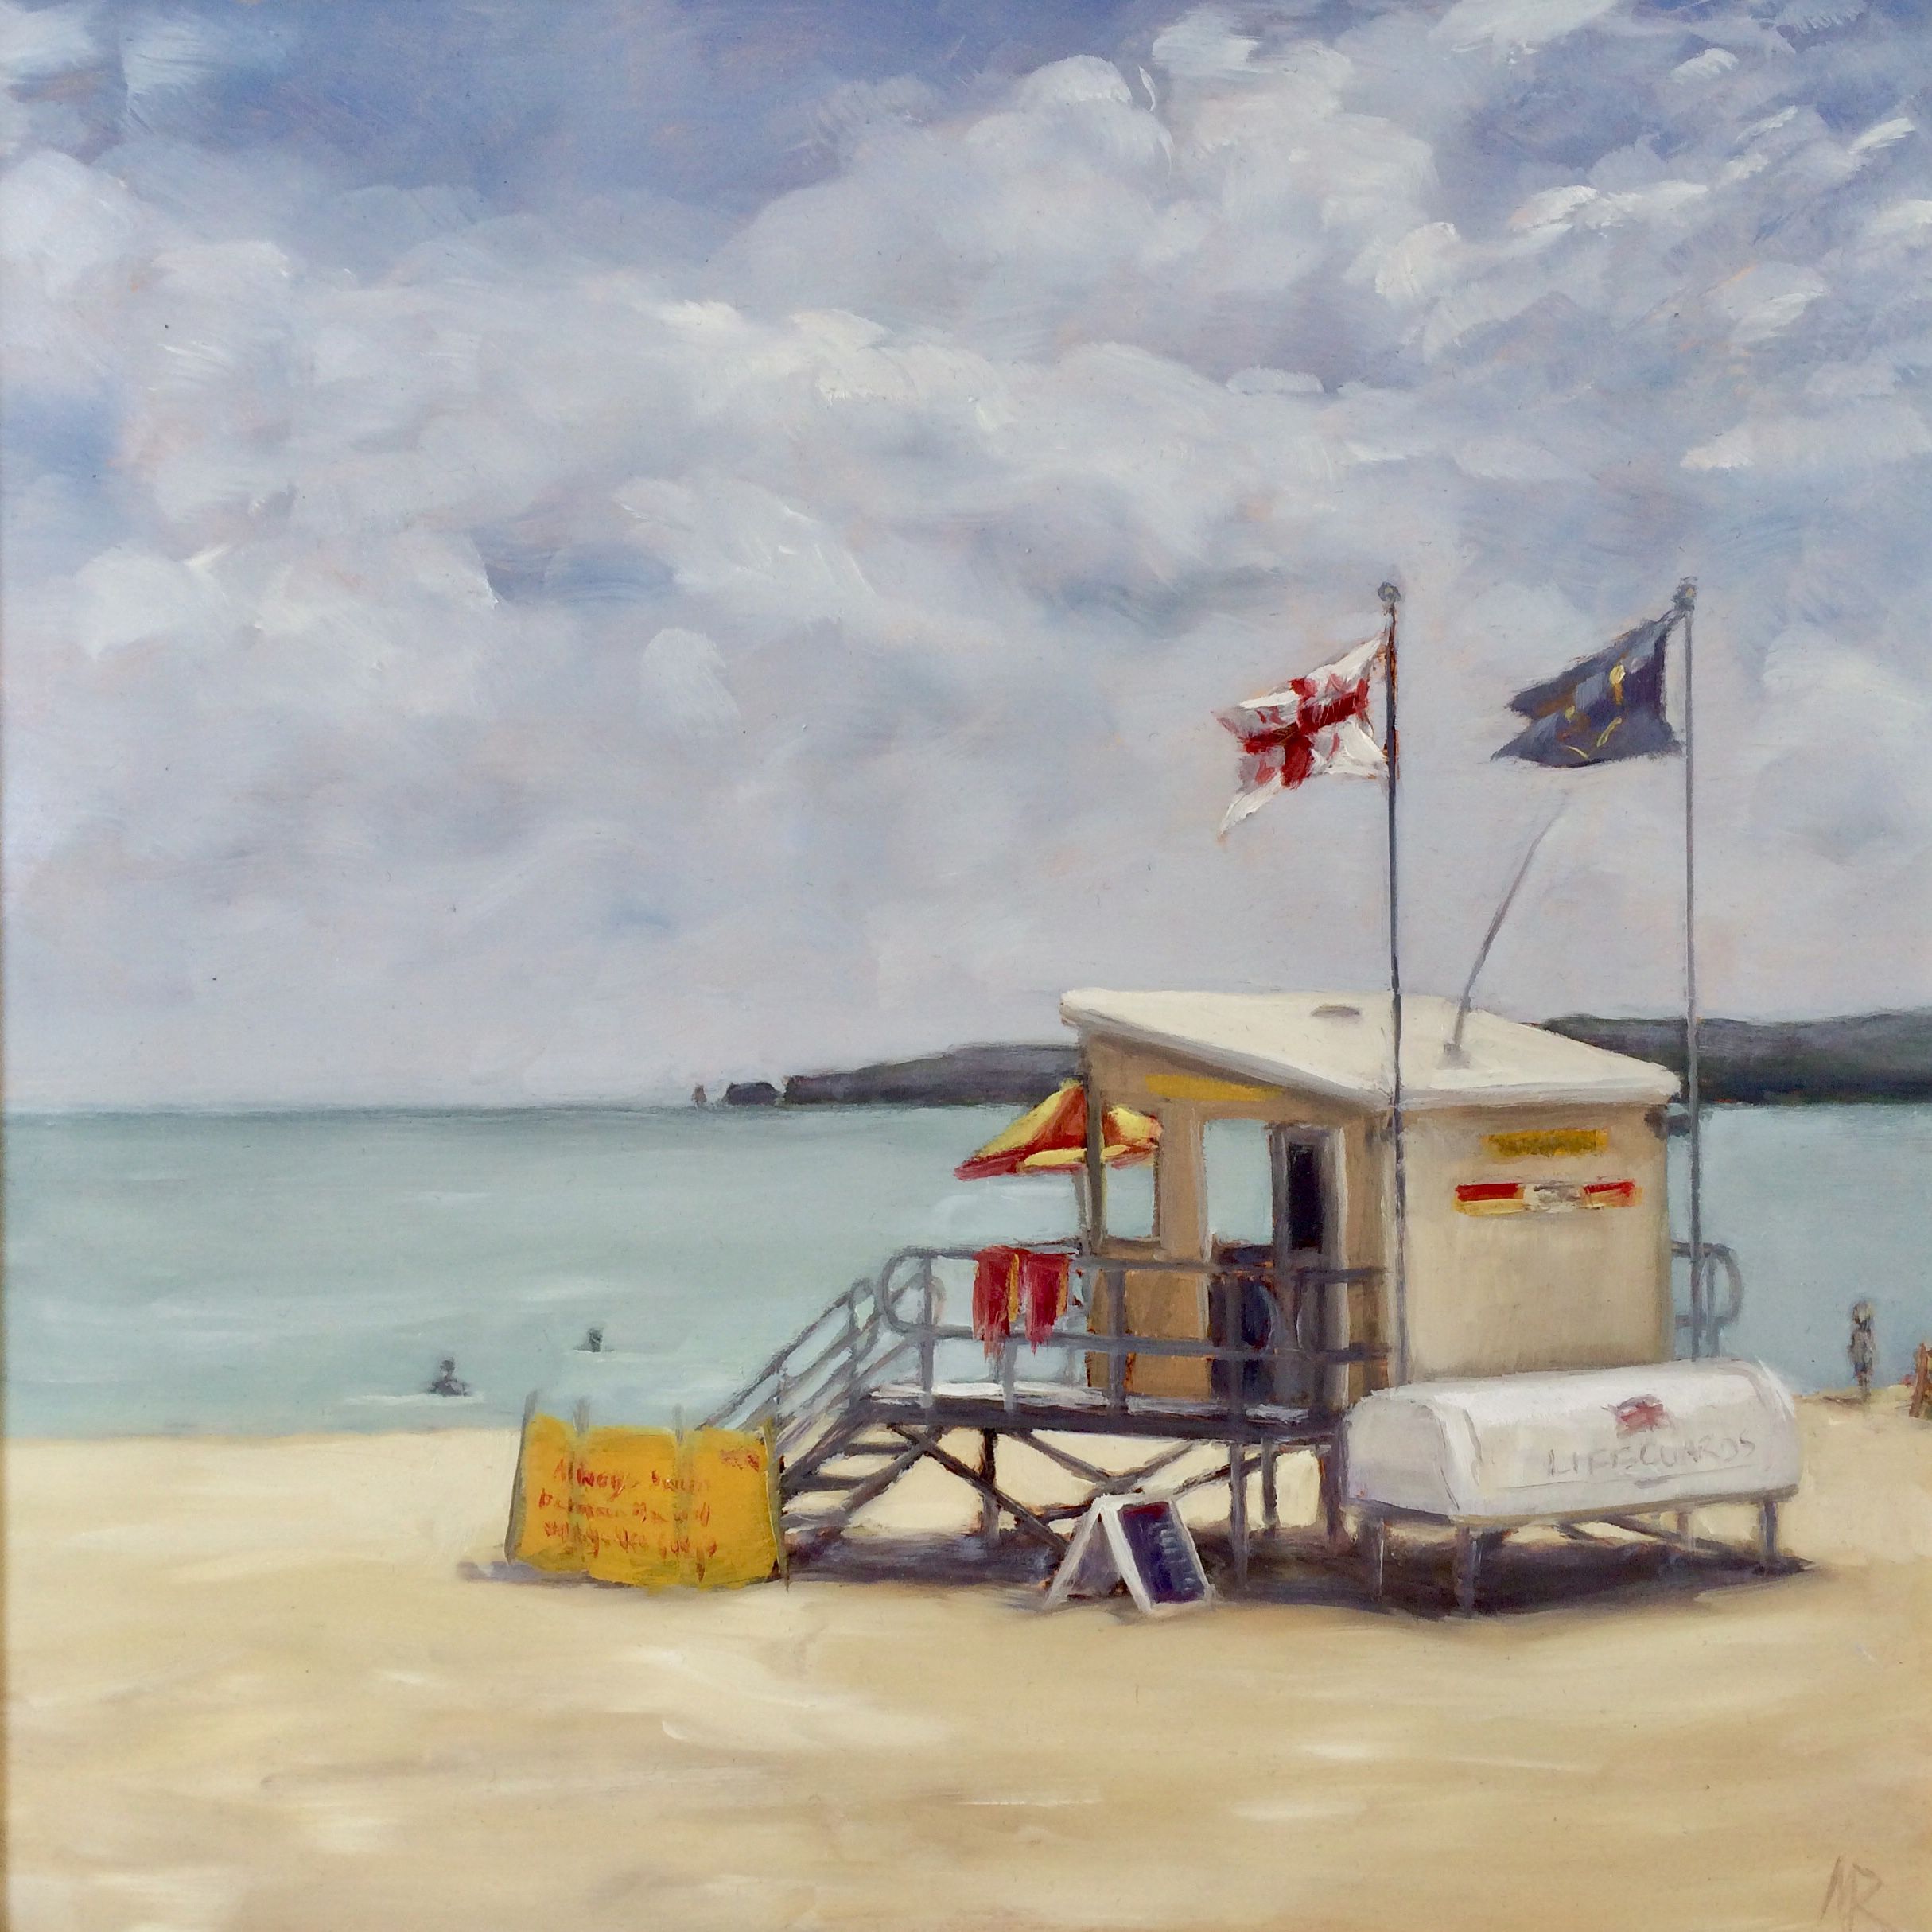 Lifeguards by Marie Robinson